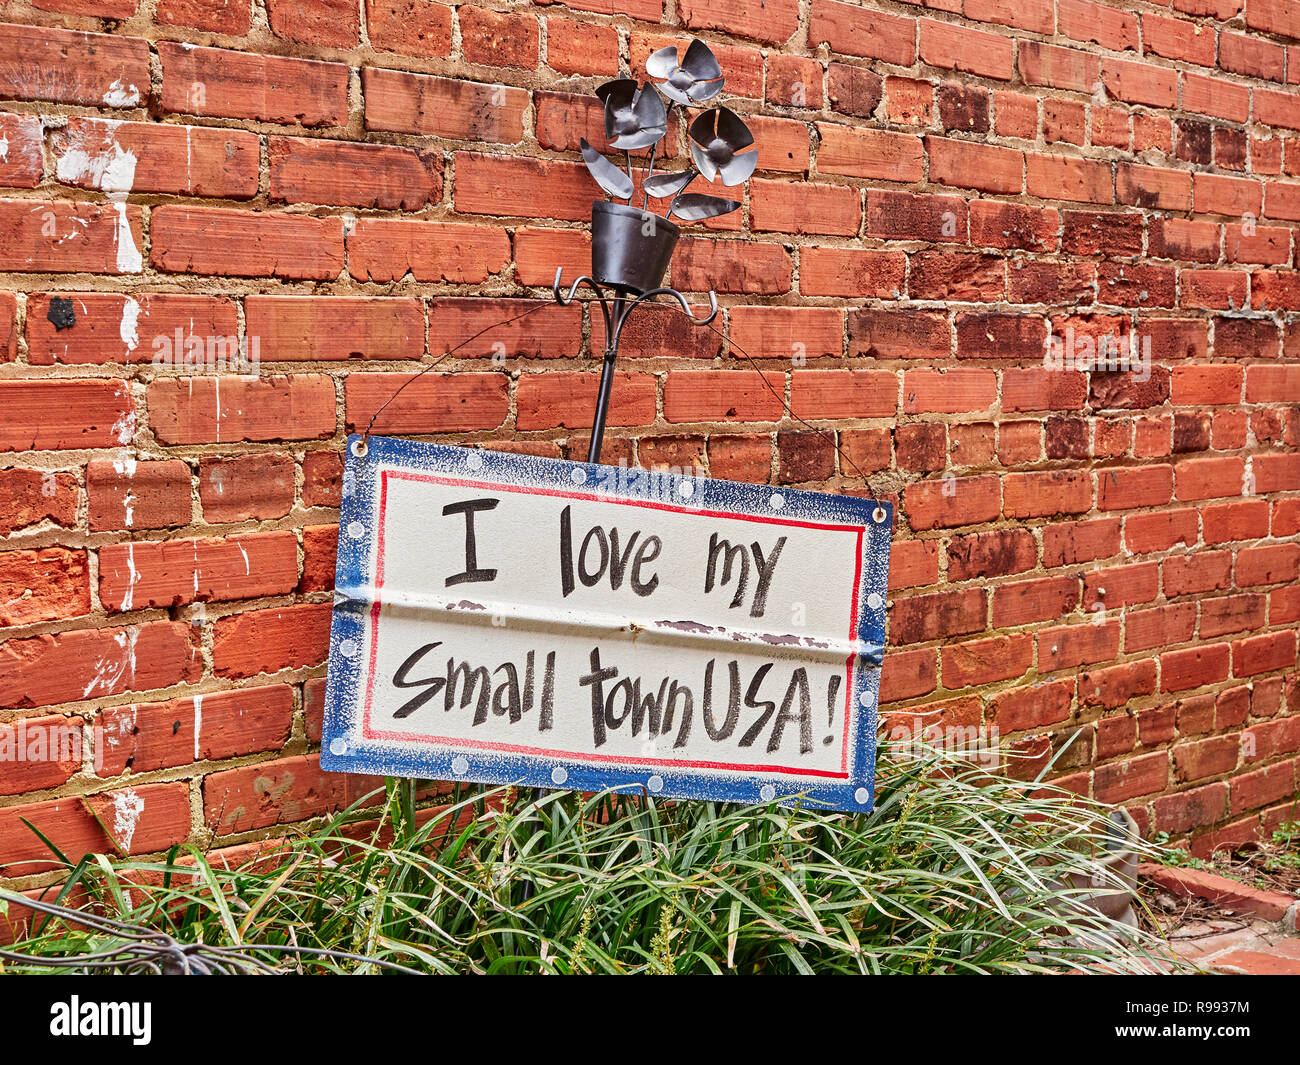 I Love My Small Town sign displayed against a brick wall in Warm Springs Georgia, USA. Stock Photo